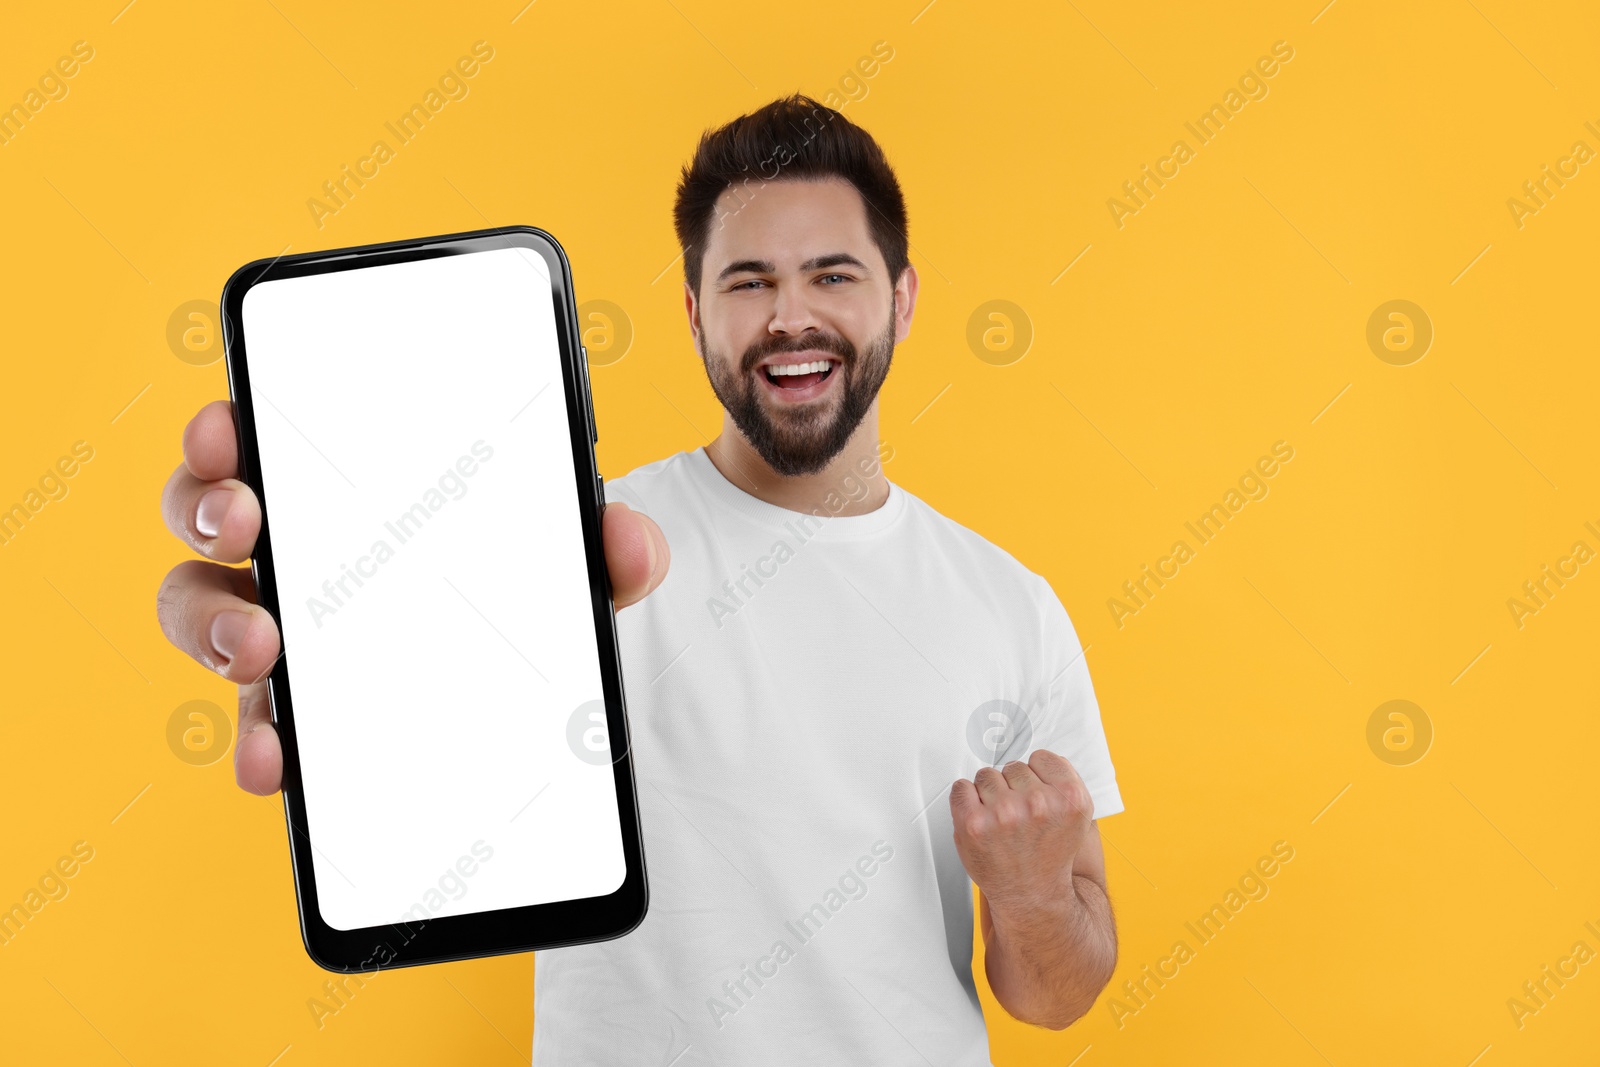 Image of Happy man holding smartphone with empty screen on orange background